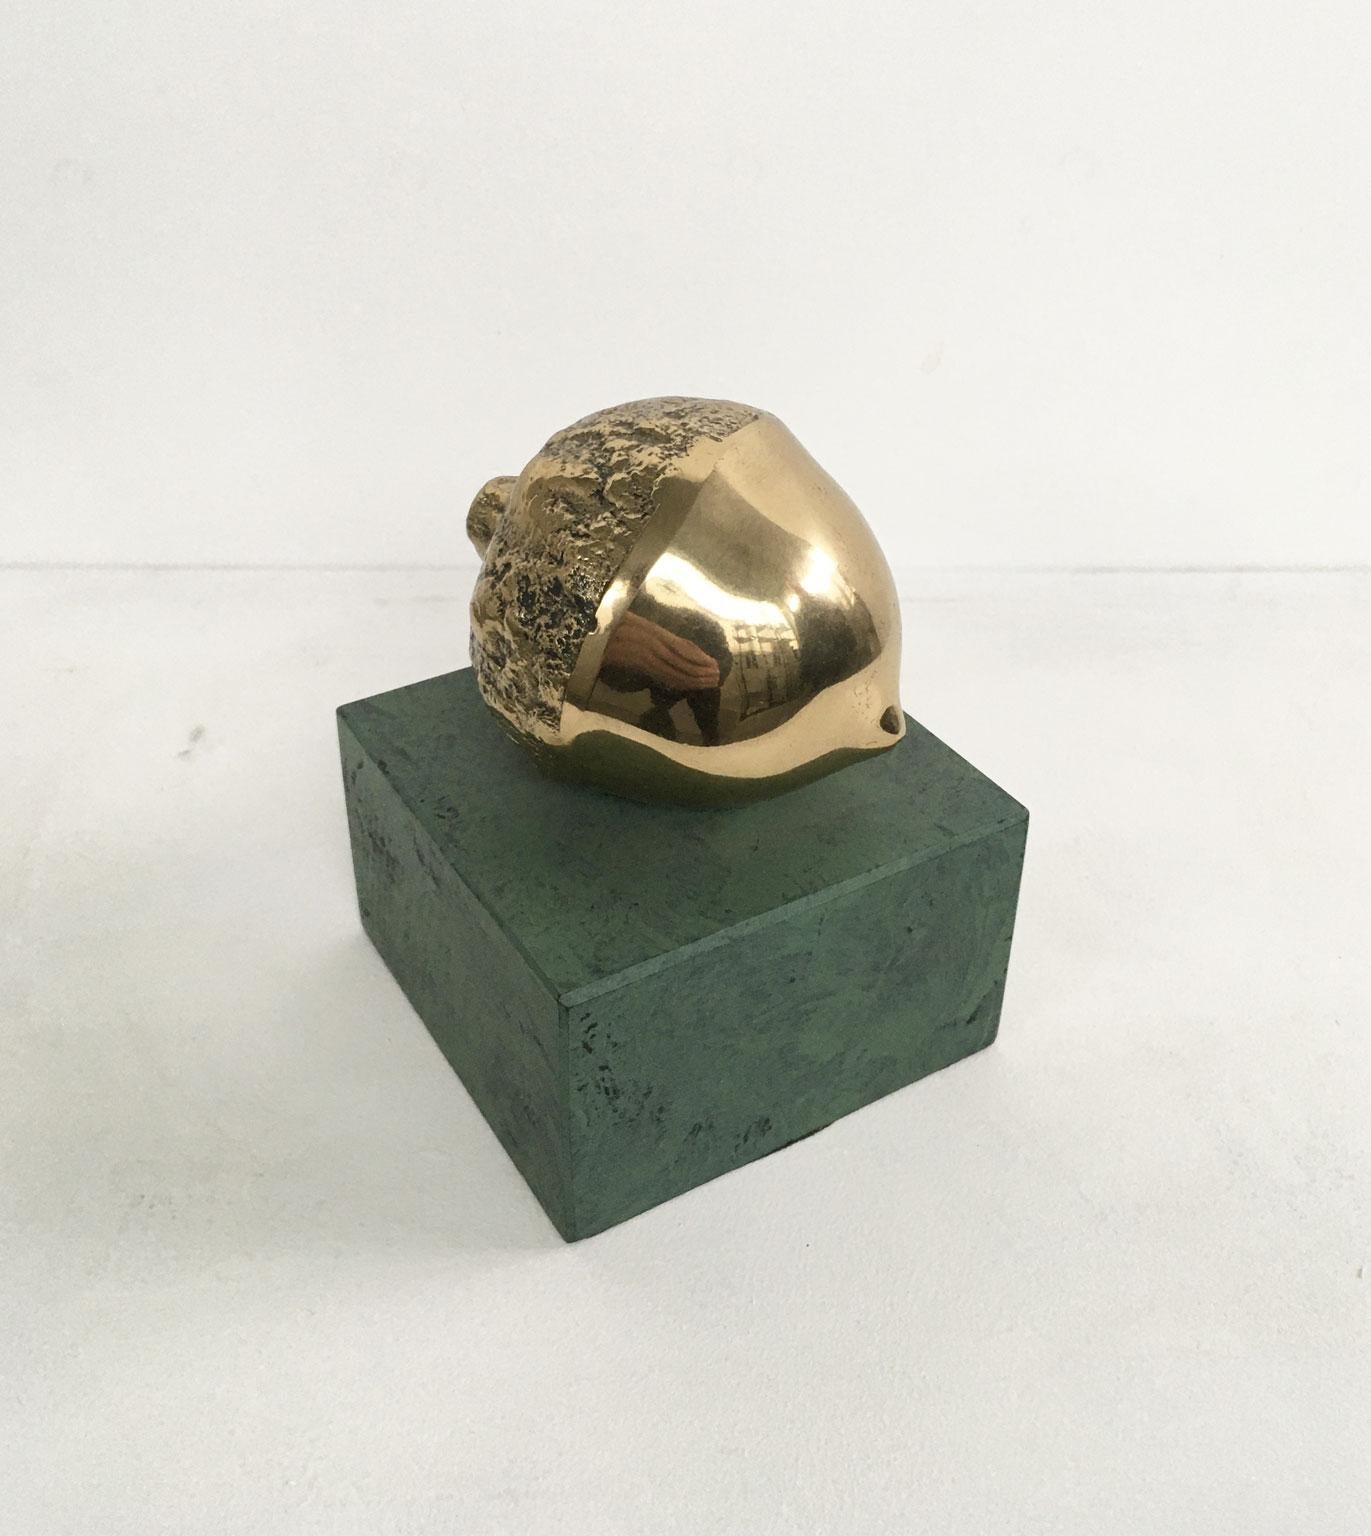 This is an engaging bronze sculpture created by the Italian artist Patrizia Guerresi, in 1986. The piece is a multiple of 1000 specimens on a green-painted wooden base. This artwork is a lucky charm Title 